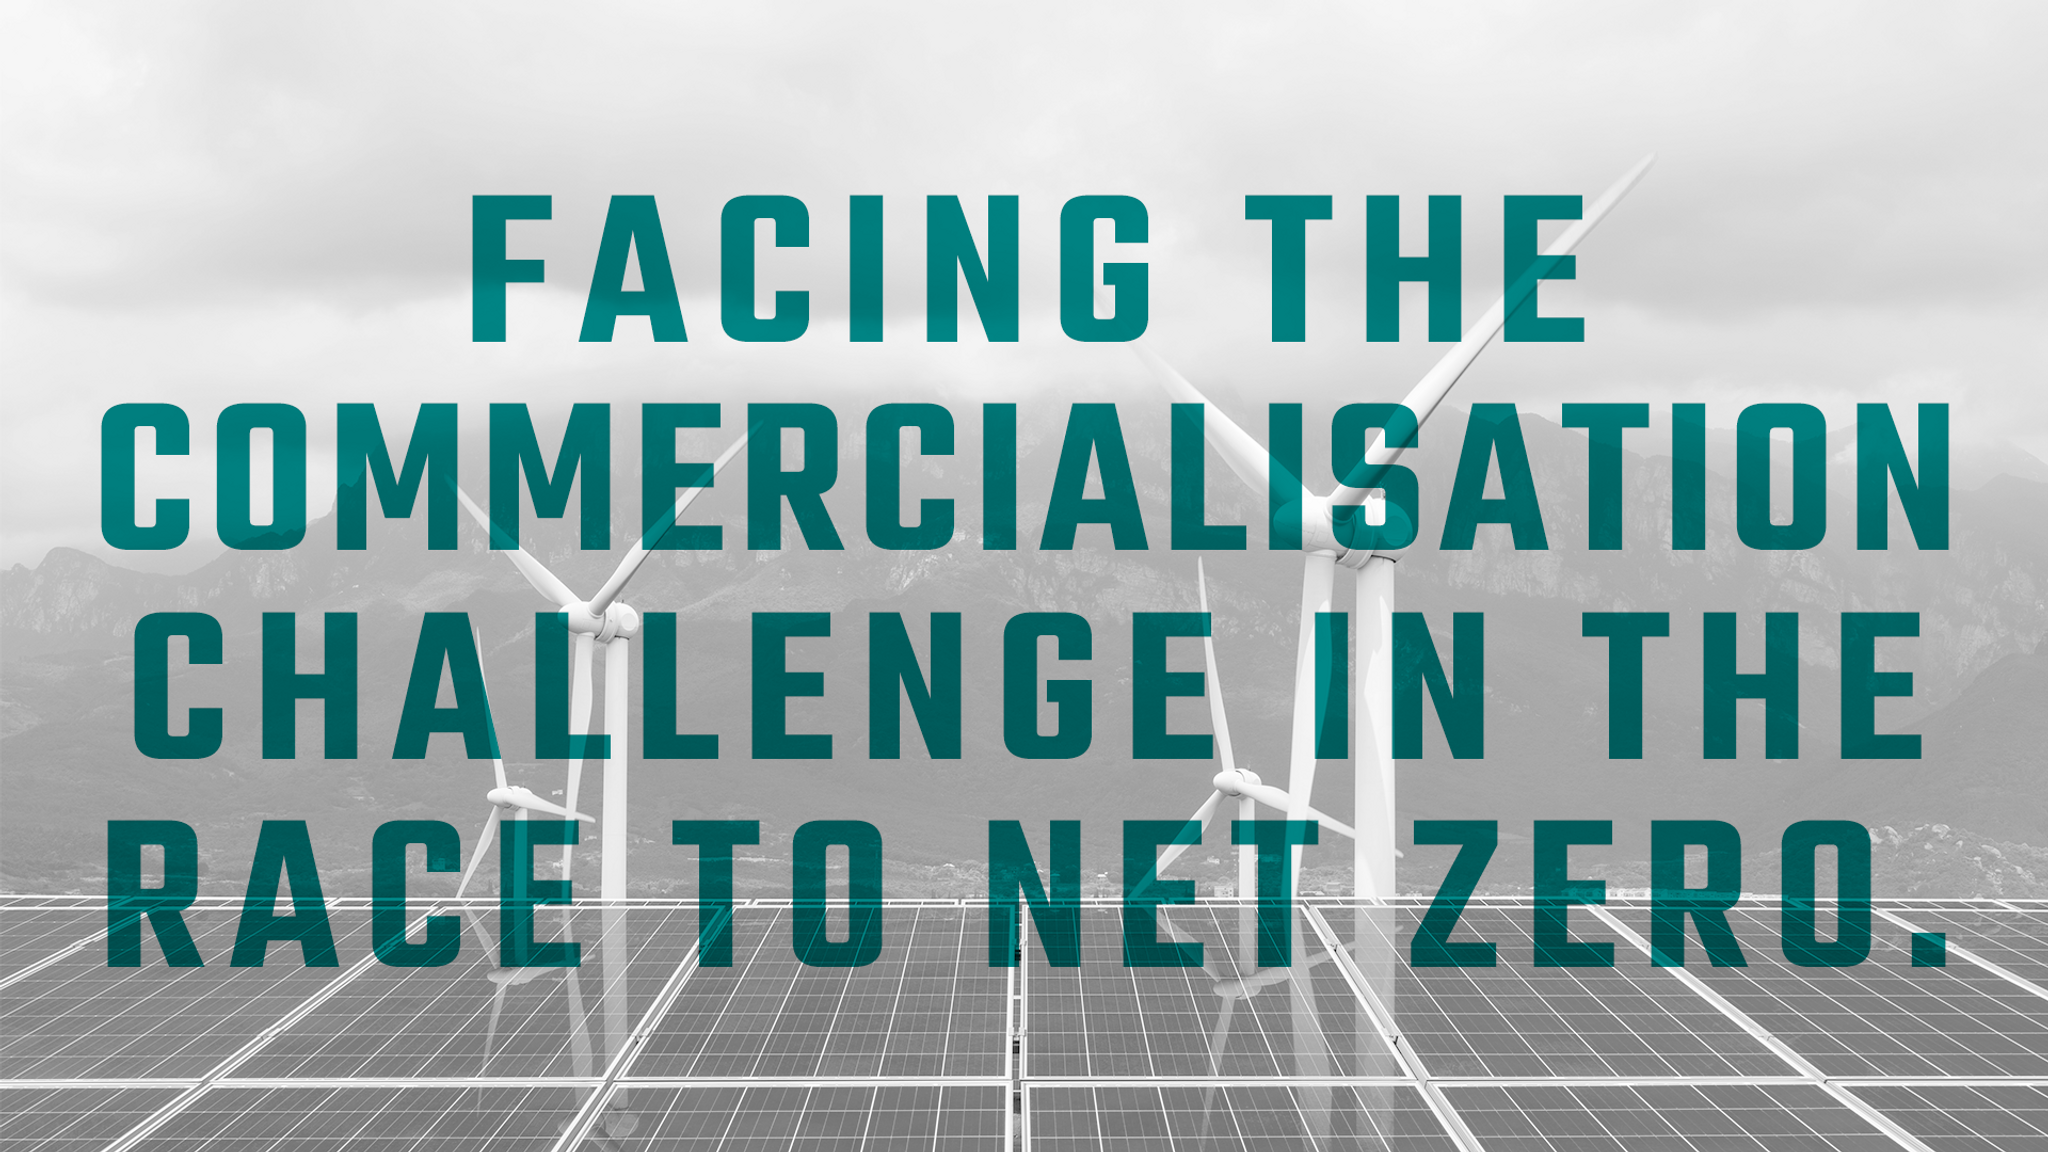 Facing the commercialisation challenge in the race to net zero. 